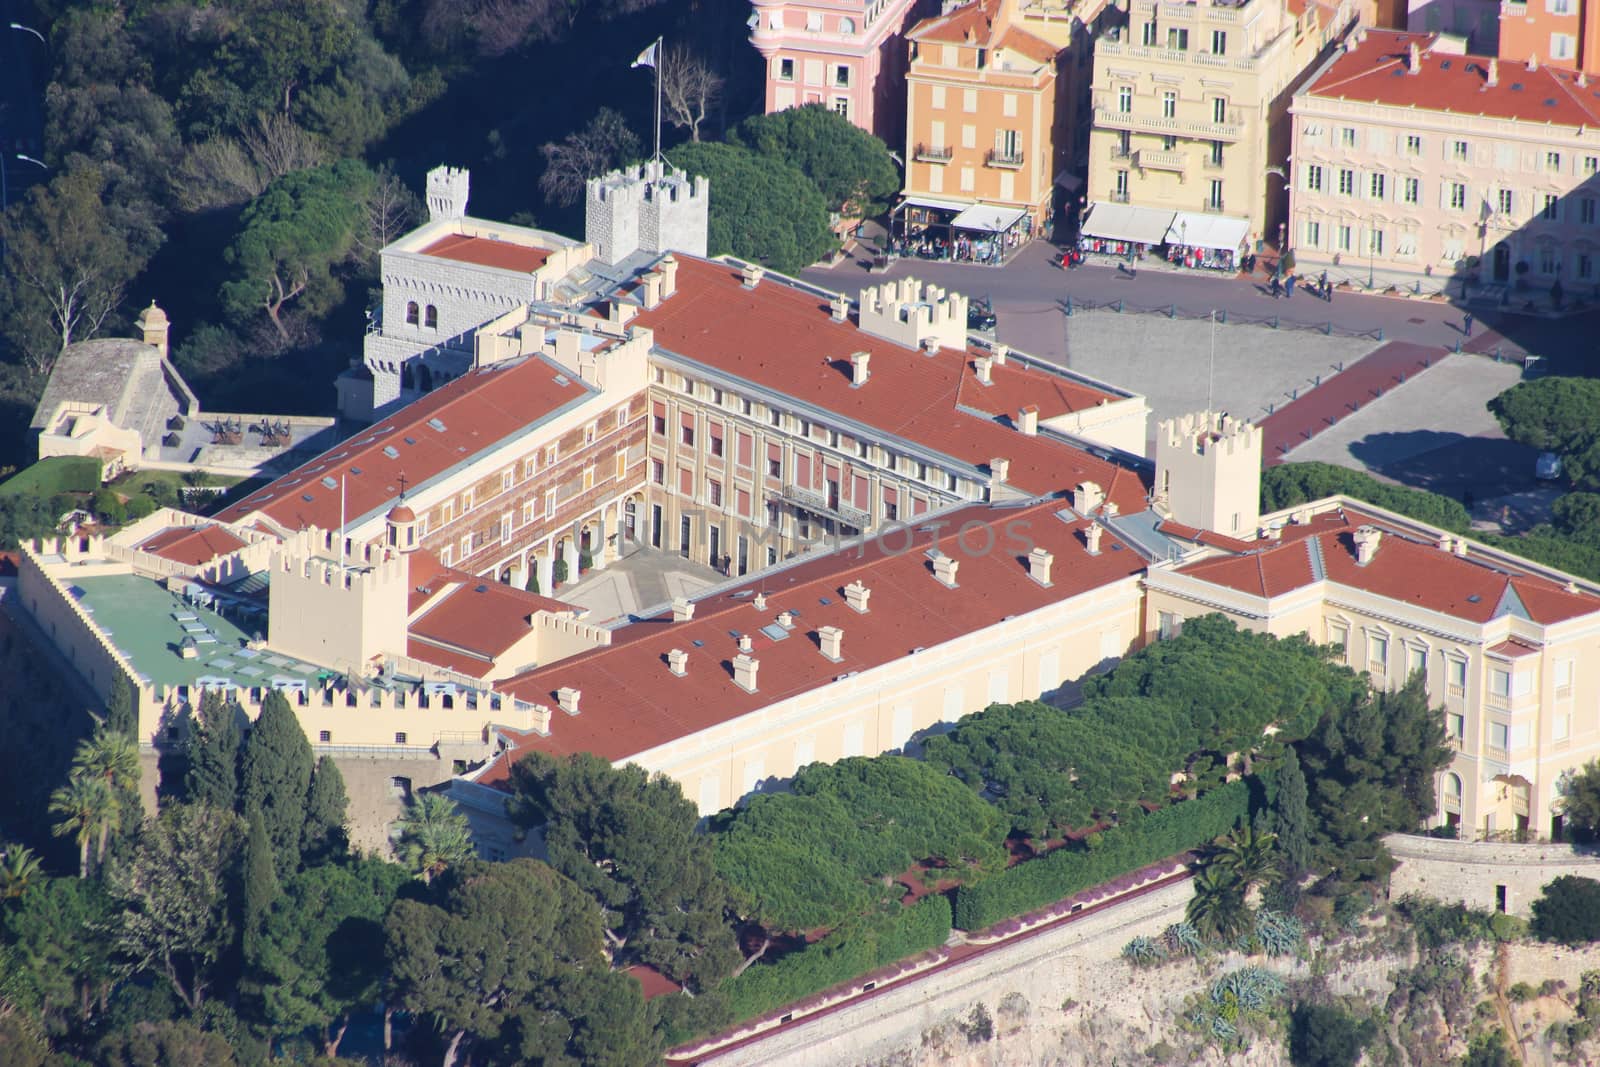 Close-up of the Prince's Palace in Monaco (Aerial View) by bensib